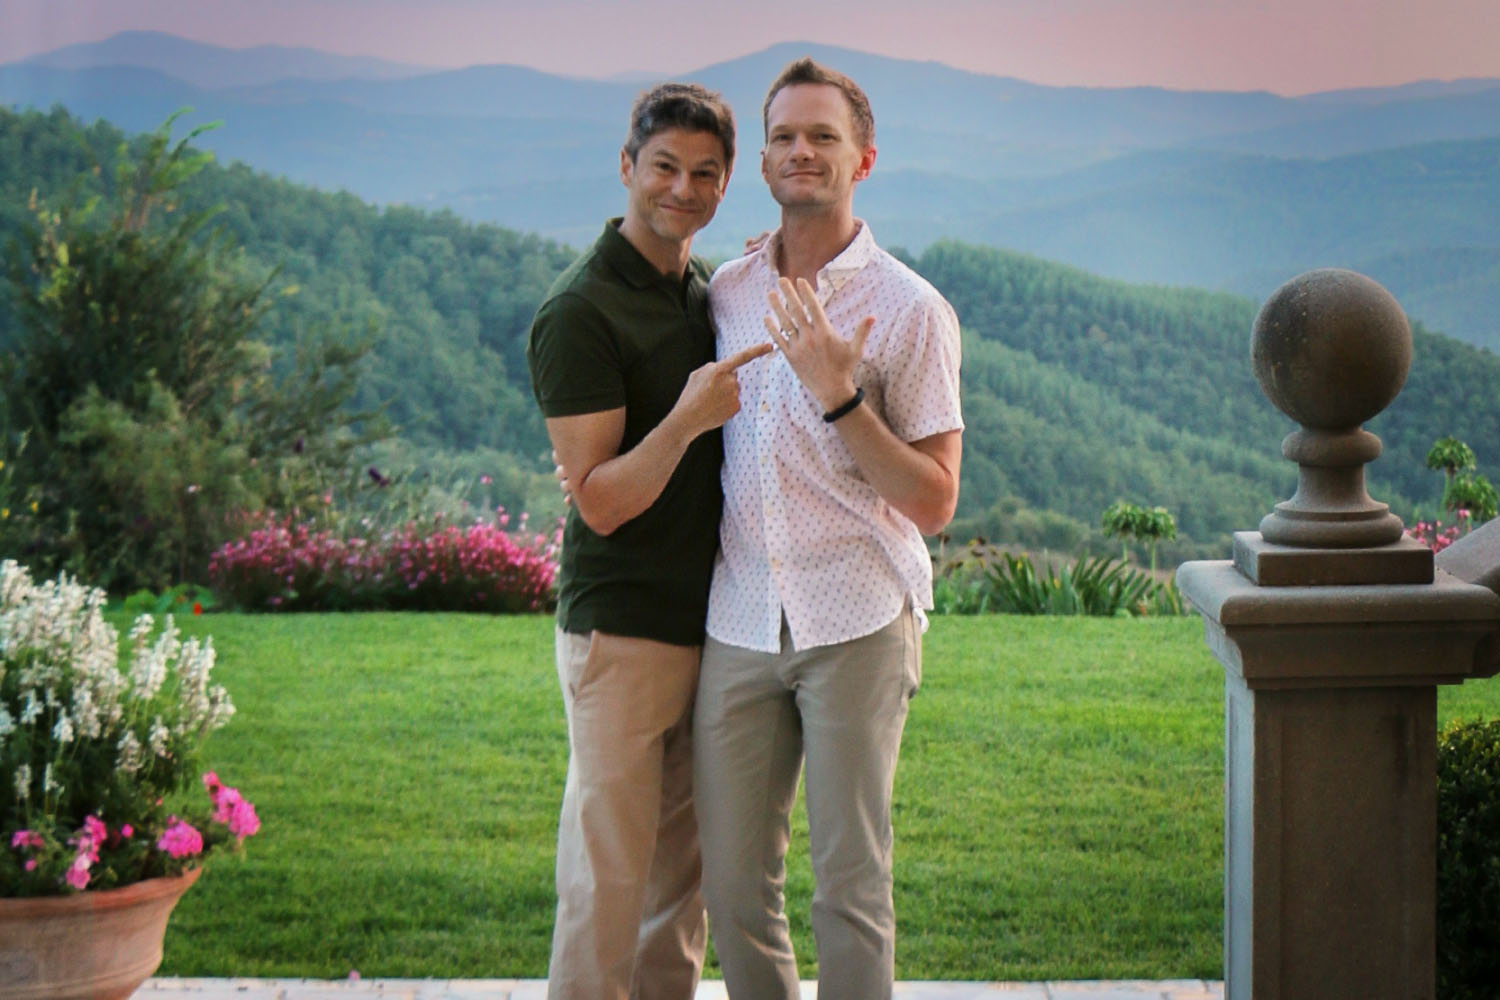 Neil Patrick Harris and David Burtka standing next to each other in front of a landscape